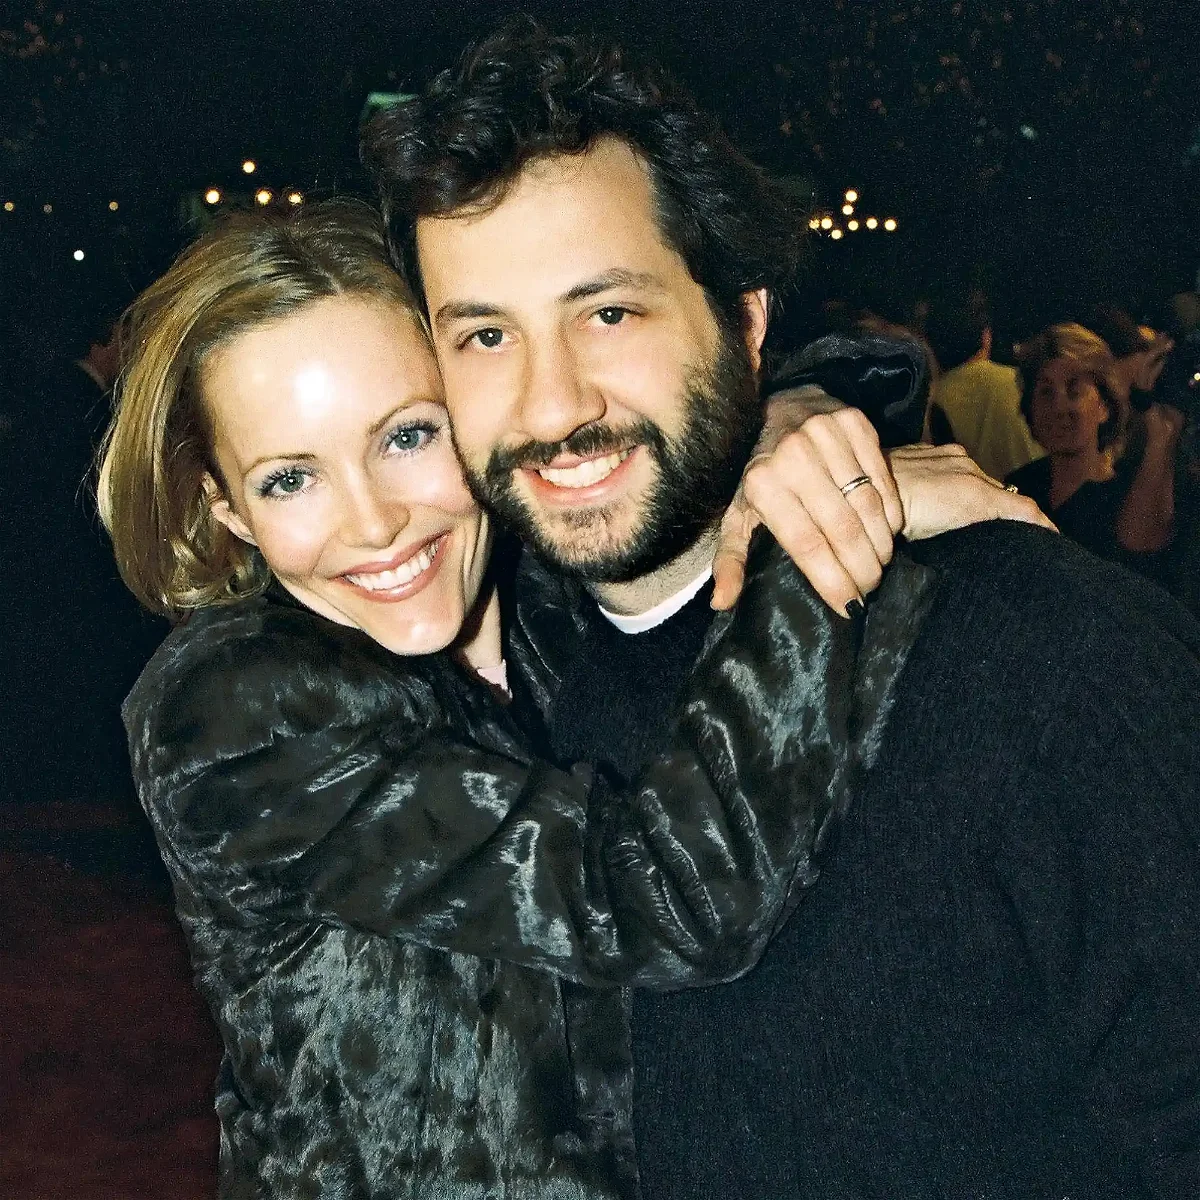 Leslie Mann And Judd Apatow Young, Forehead, Cheek, Lip, Smile, Chin, Outerwear, Eyebrow, Facial expression, Flash photography, Beard